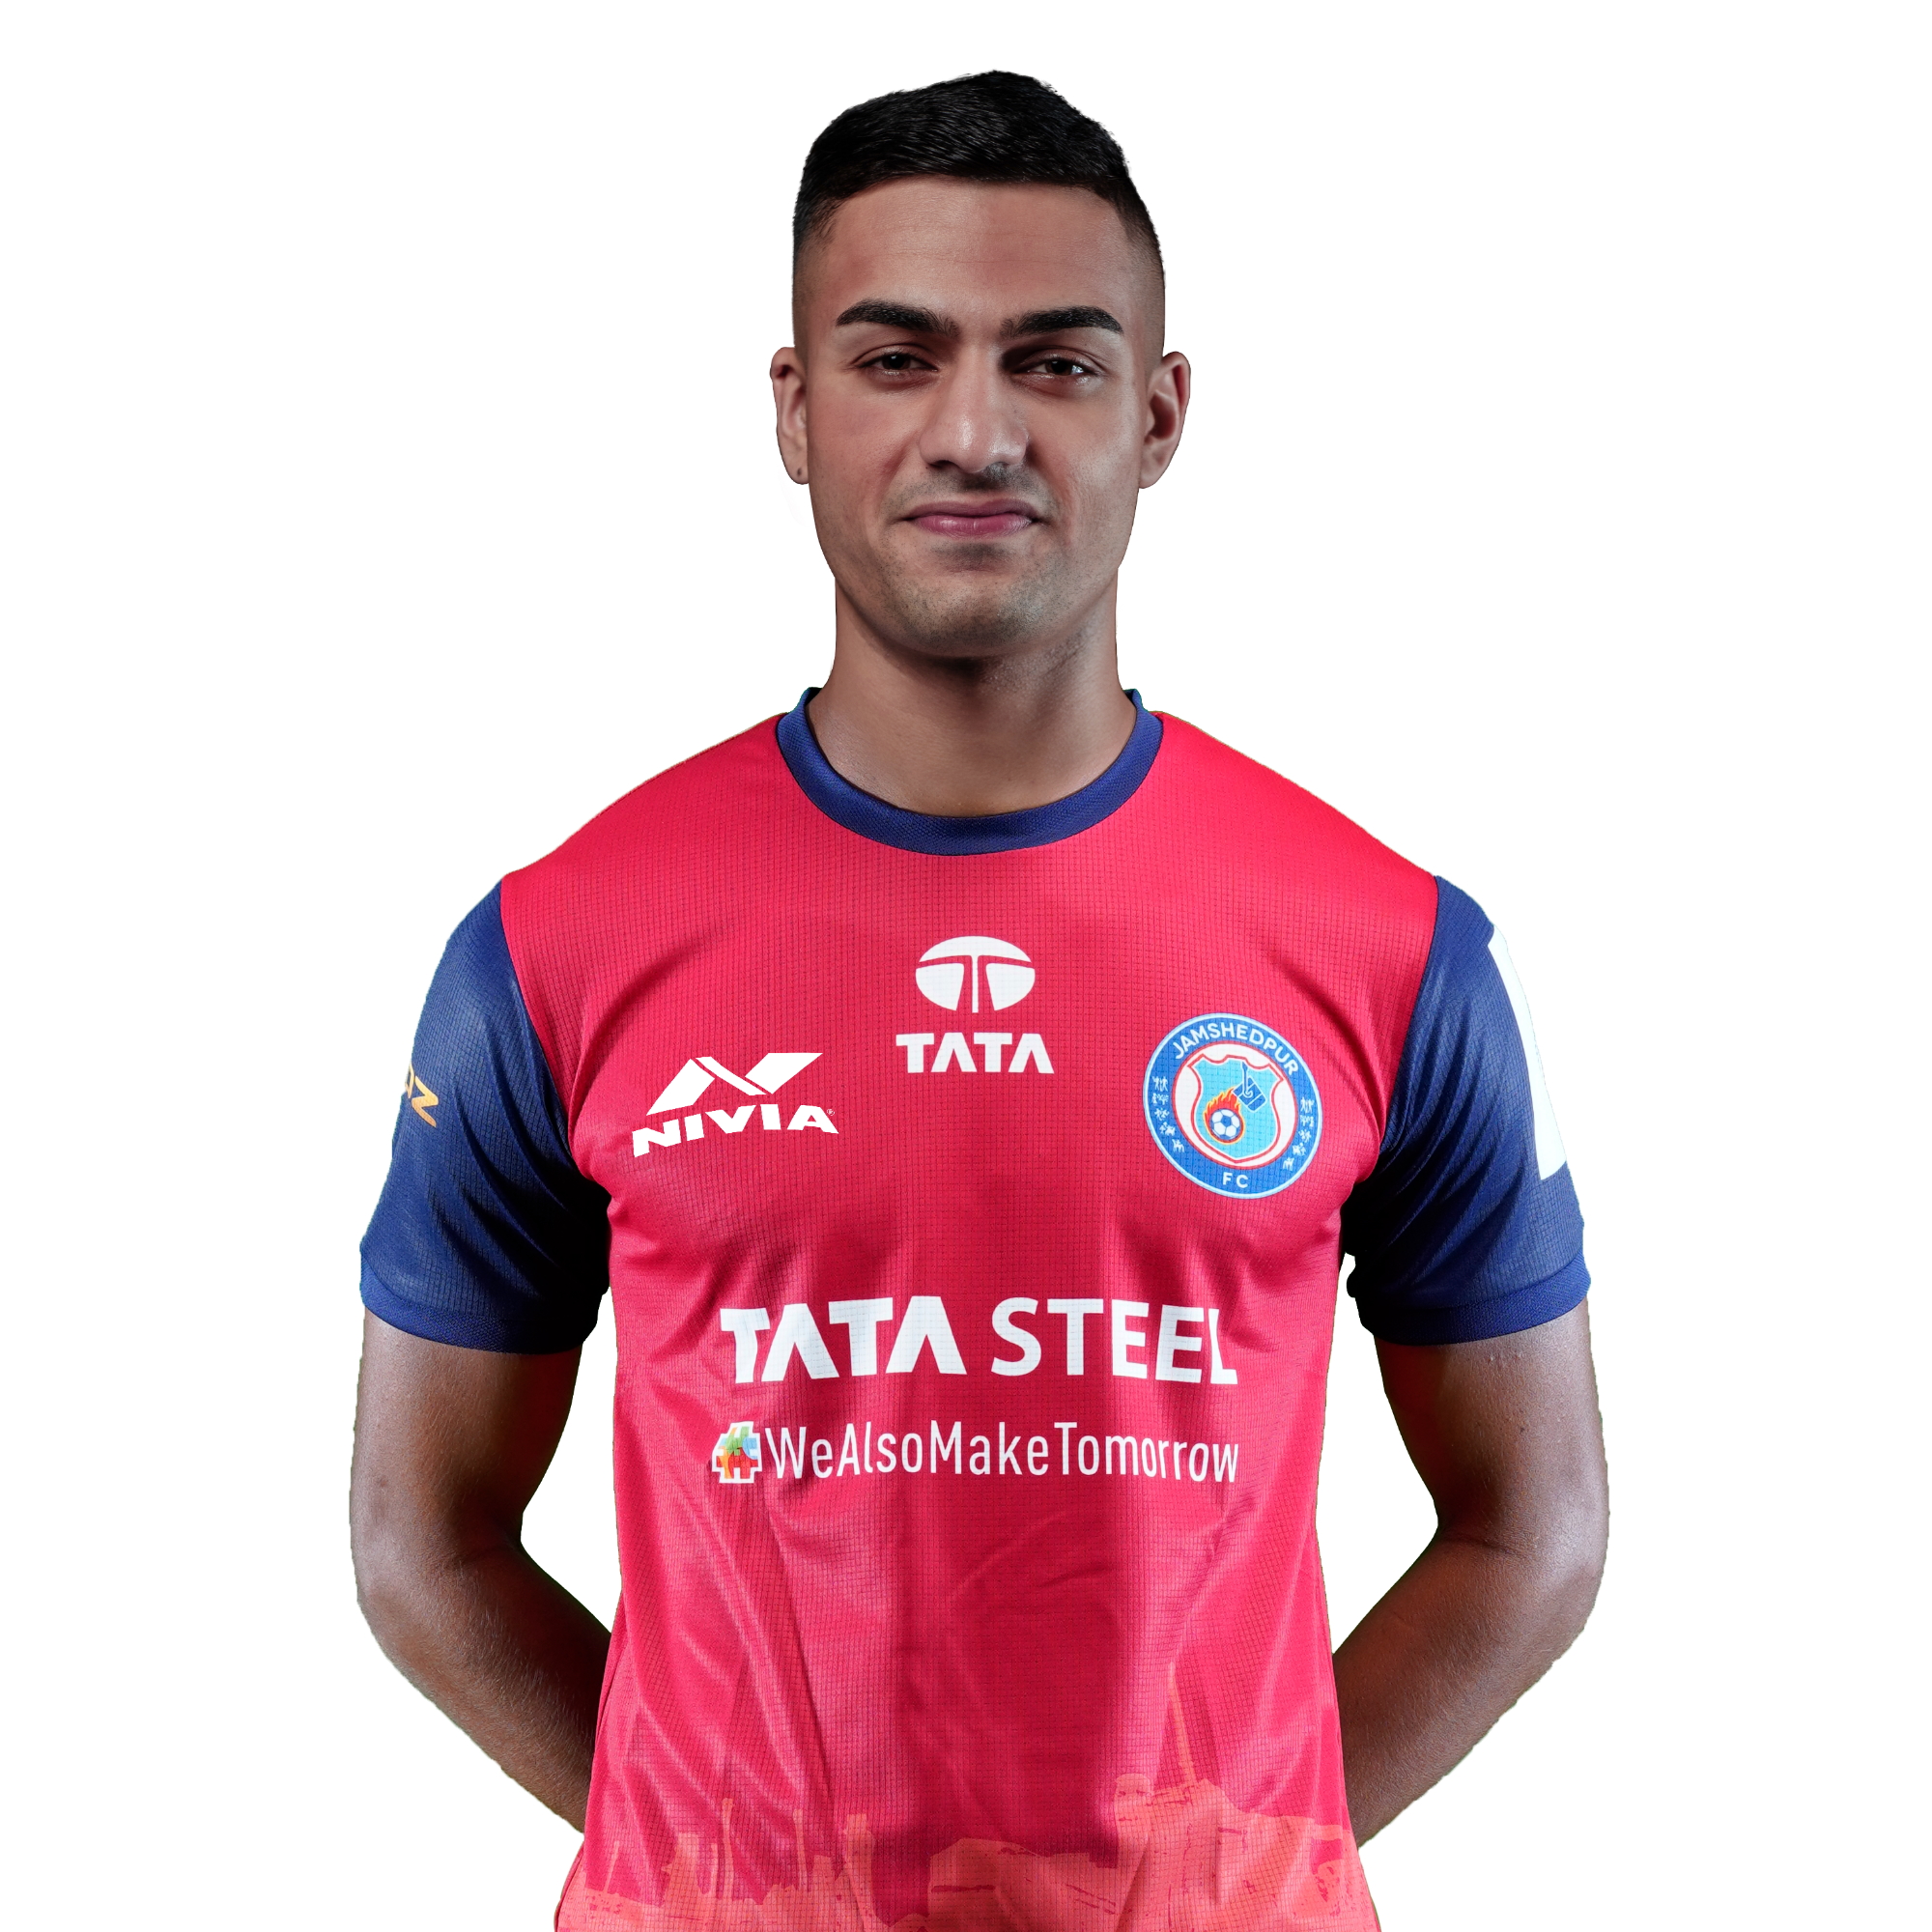 2021-22 ISL | Jamshedpur FC rope in Ishan Pandita on a two-year deal